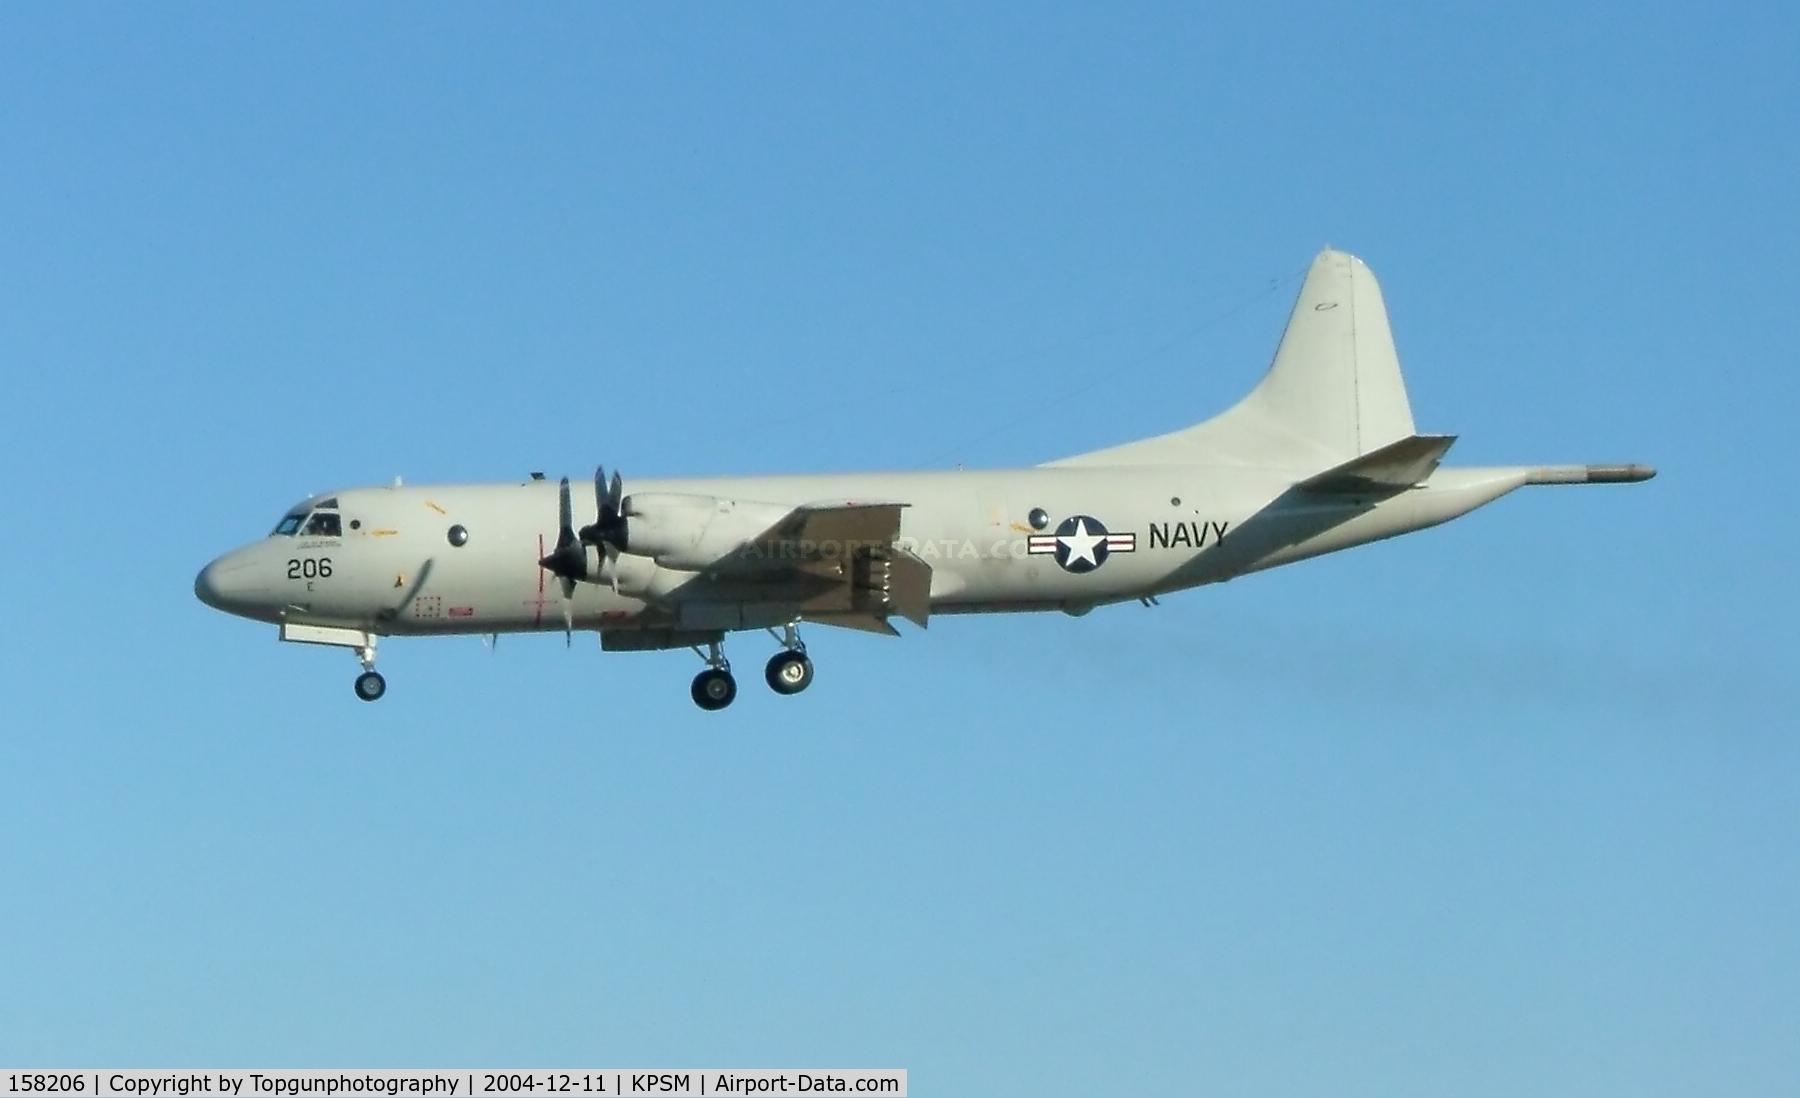 158206, 1971 Lockheed P-3C Orion C/N 285A-5550, VQ-1 out of NAS Brunswick